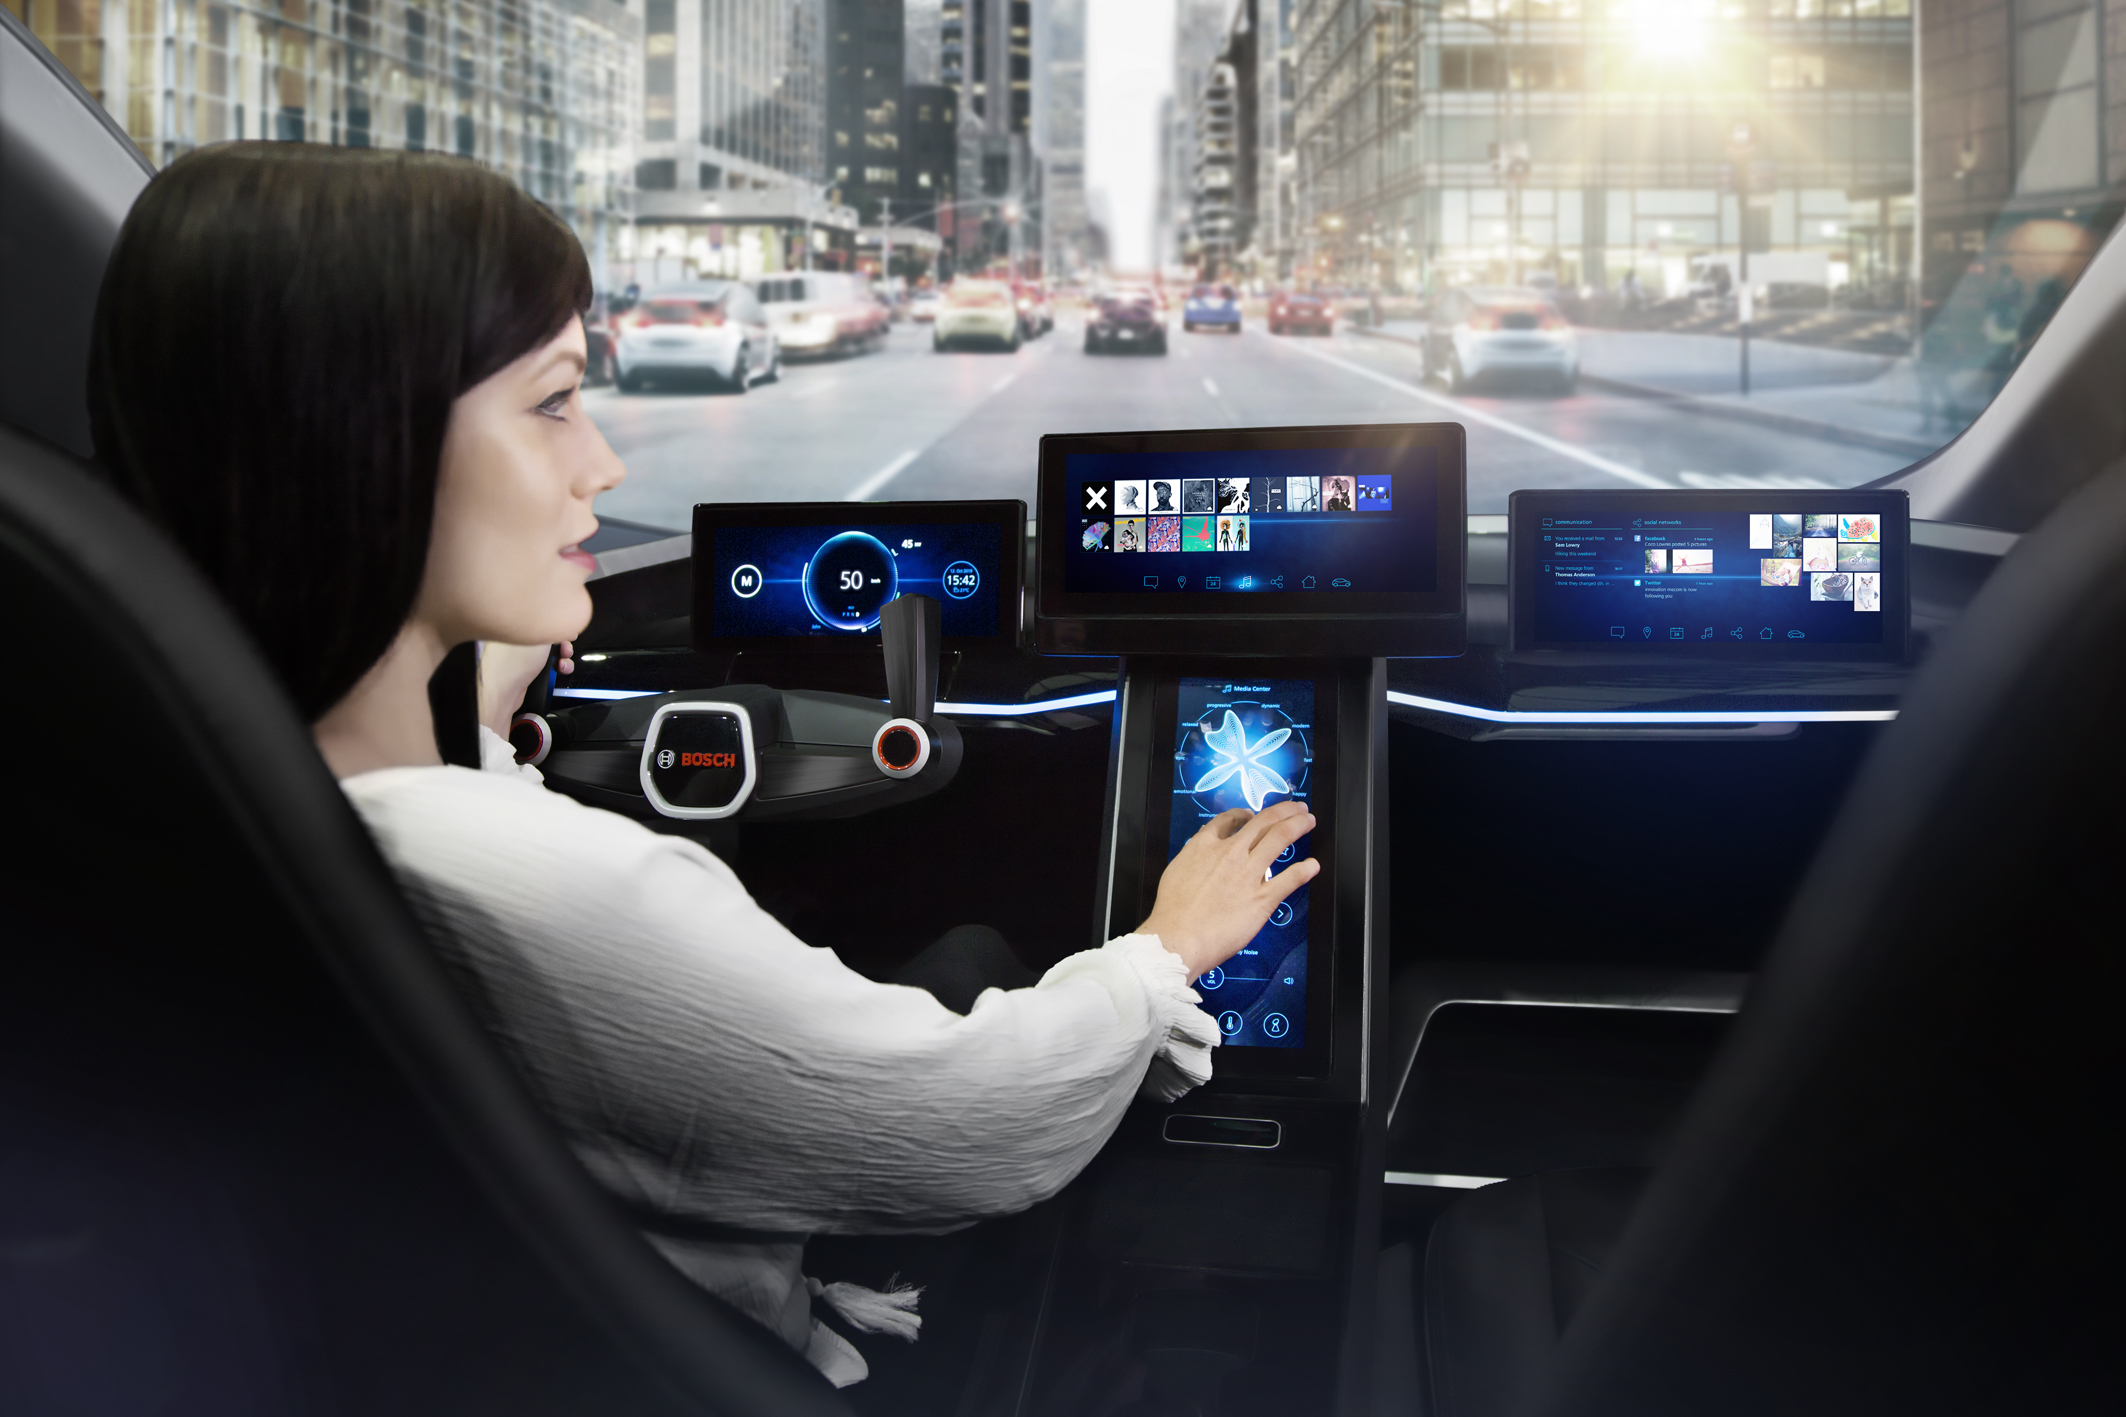 “Just driving” was yesterday – the personal assistant is tomorrow